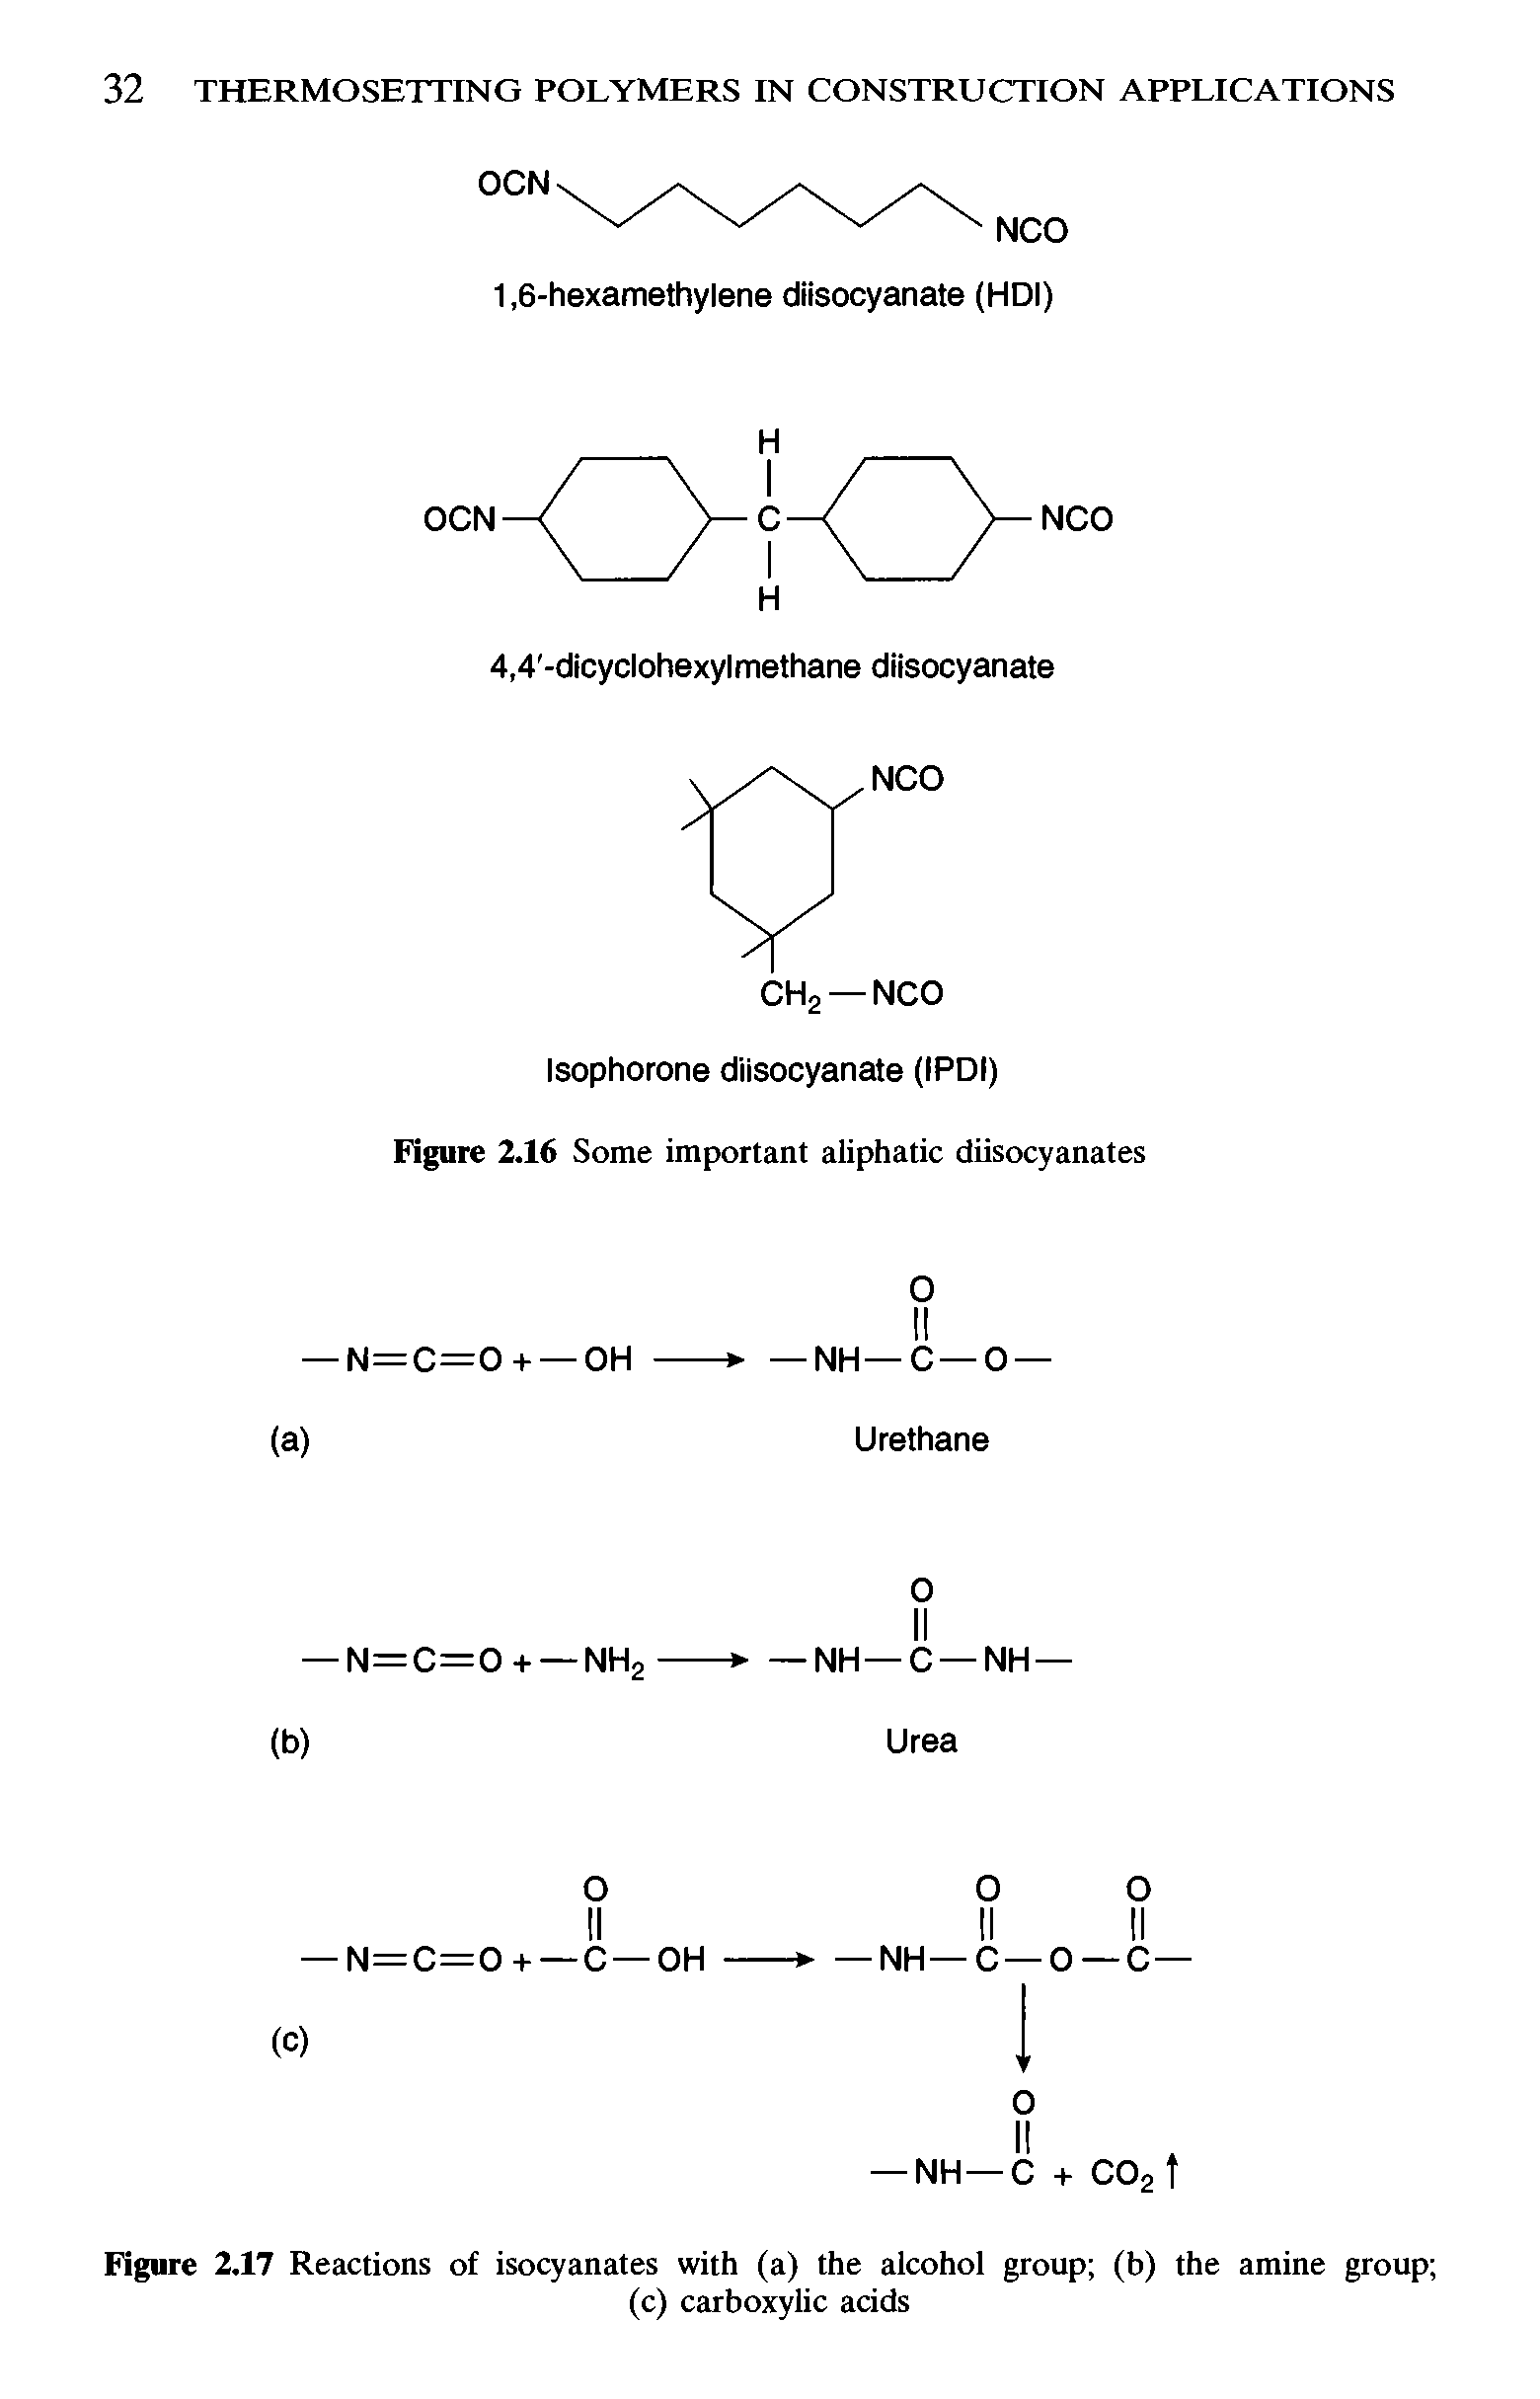 Figure 2.17 Reactions of isocyanates with (a) the alcohol group (b) the amine group ...